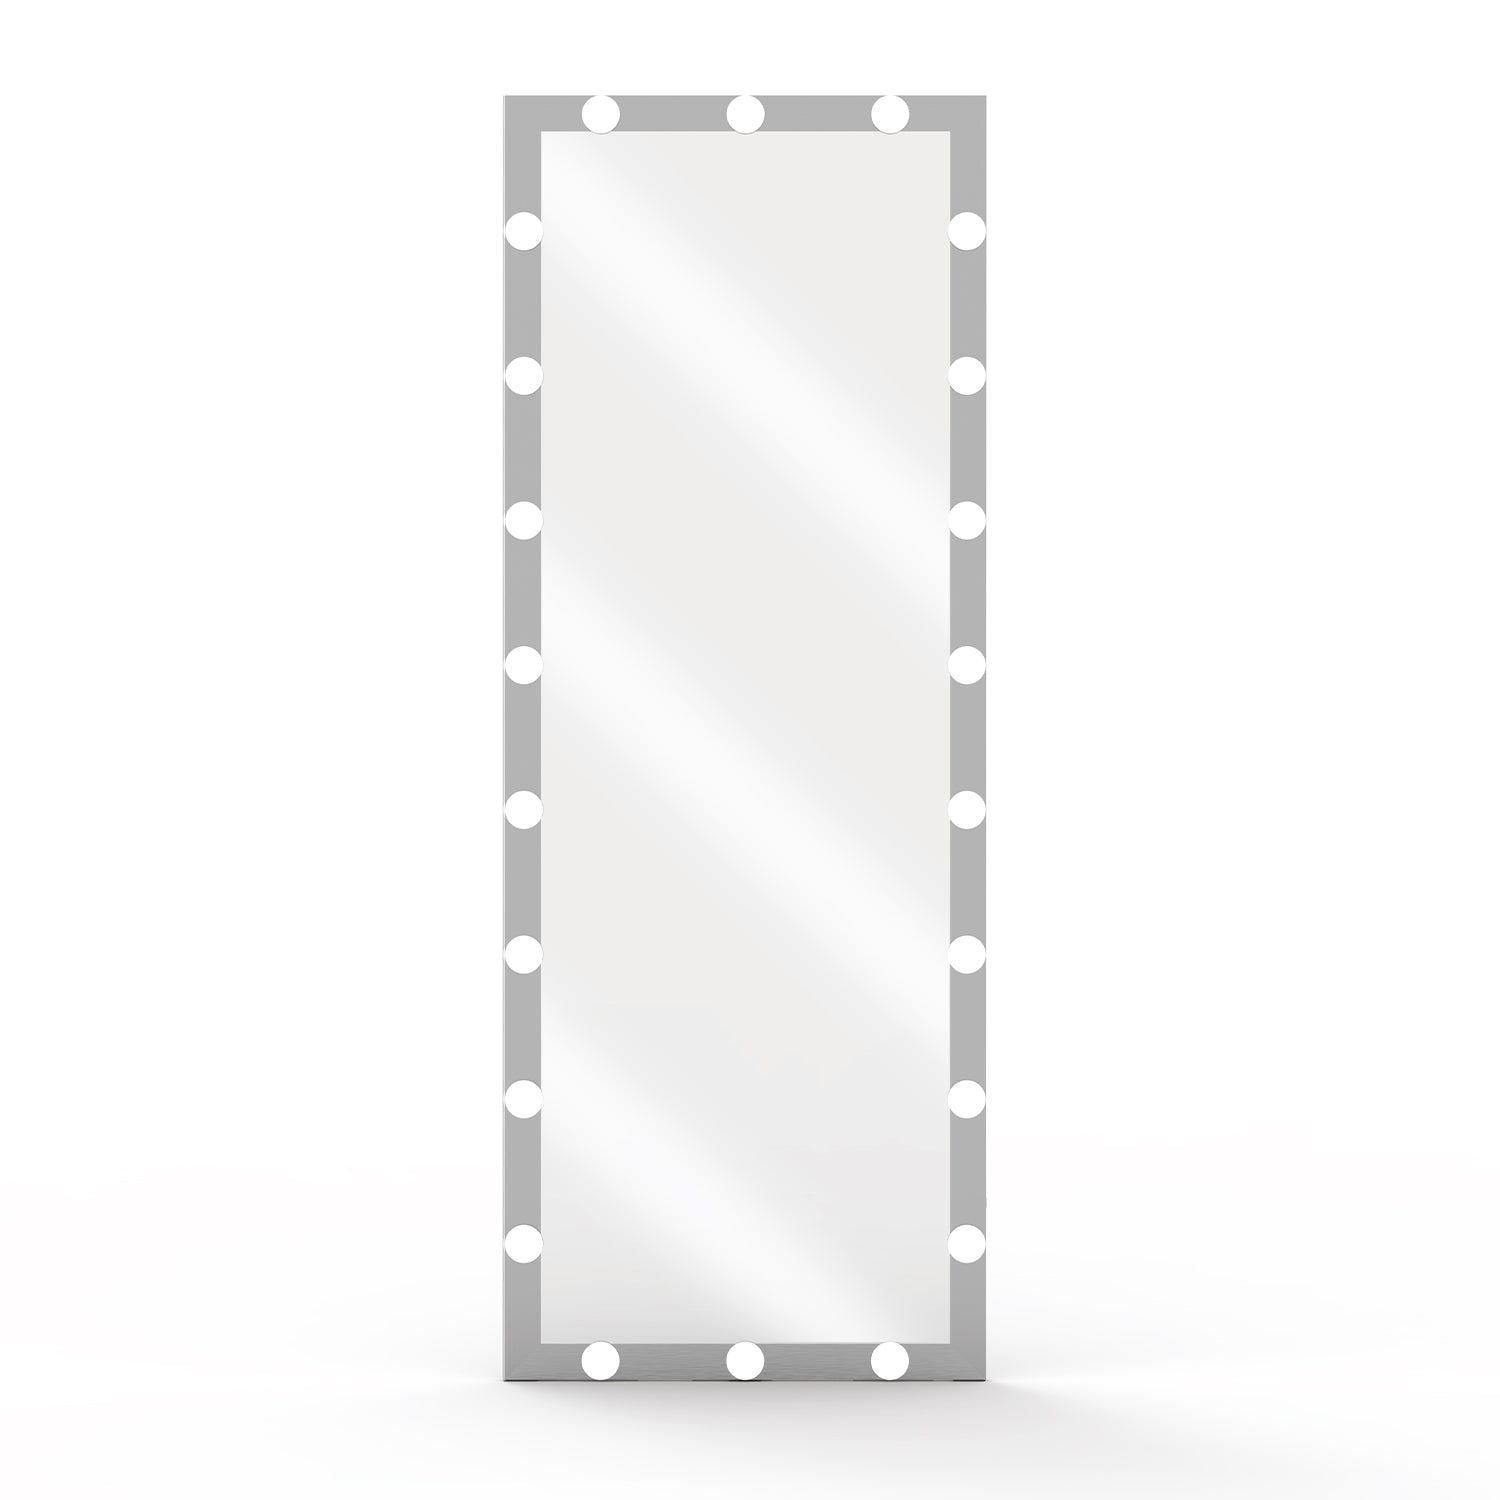 Hollywood Full Length Mirror with Lights Full Body Vanity Mirror with 3 Color Modes Lighted Standing Floor Mirror for Dressing Room Bedroom Wall Mounted Touch Control Silver 63"x24"